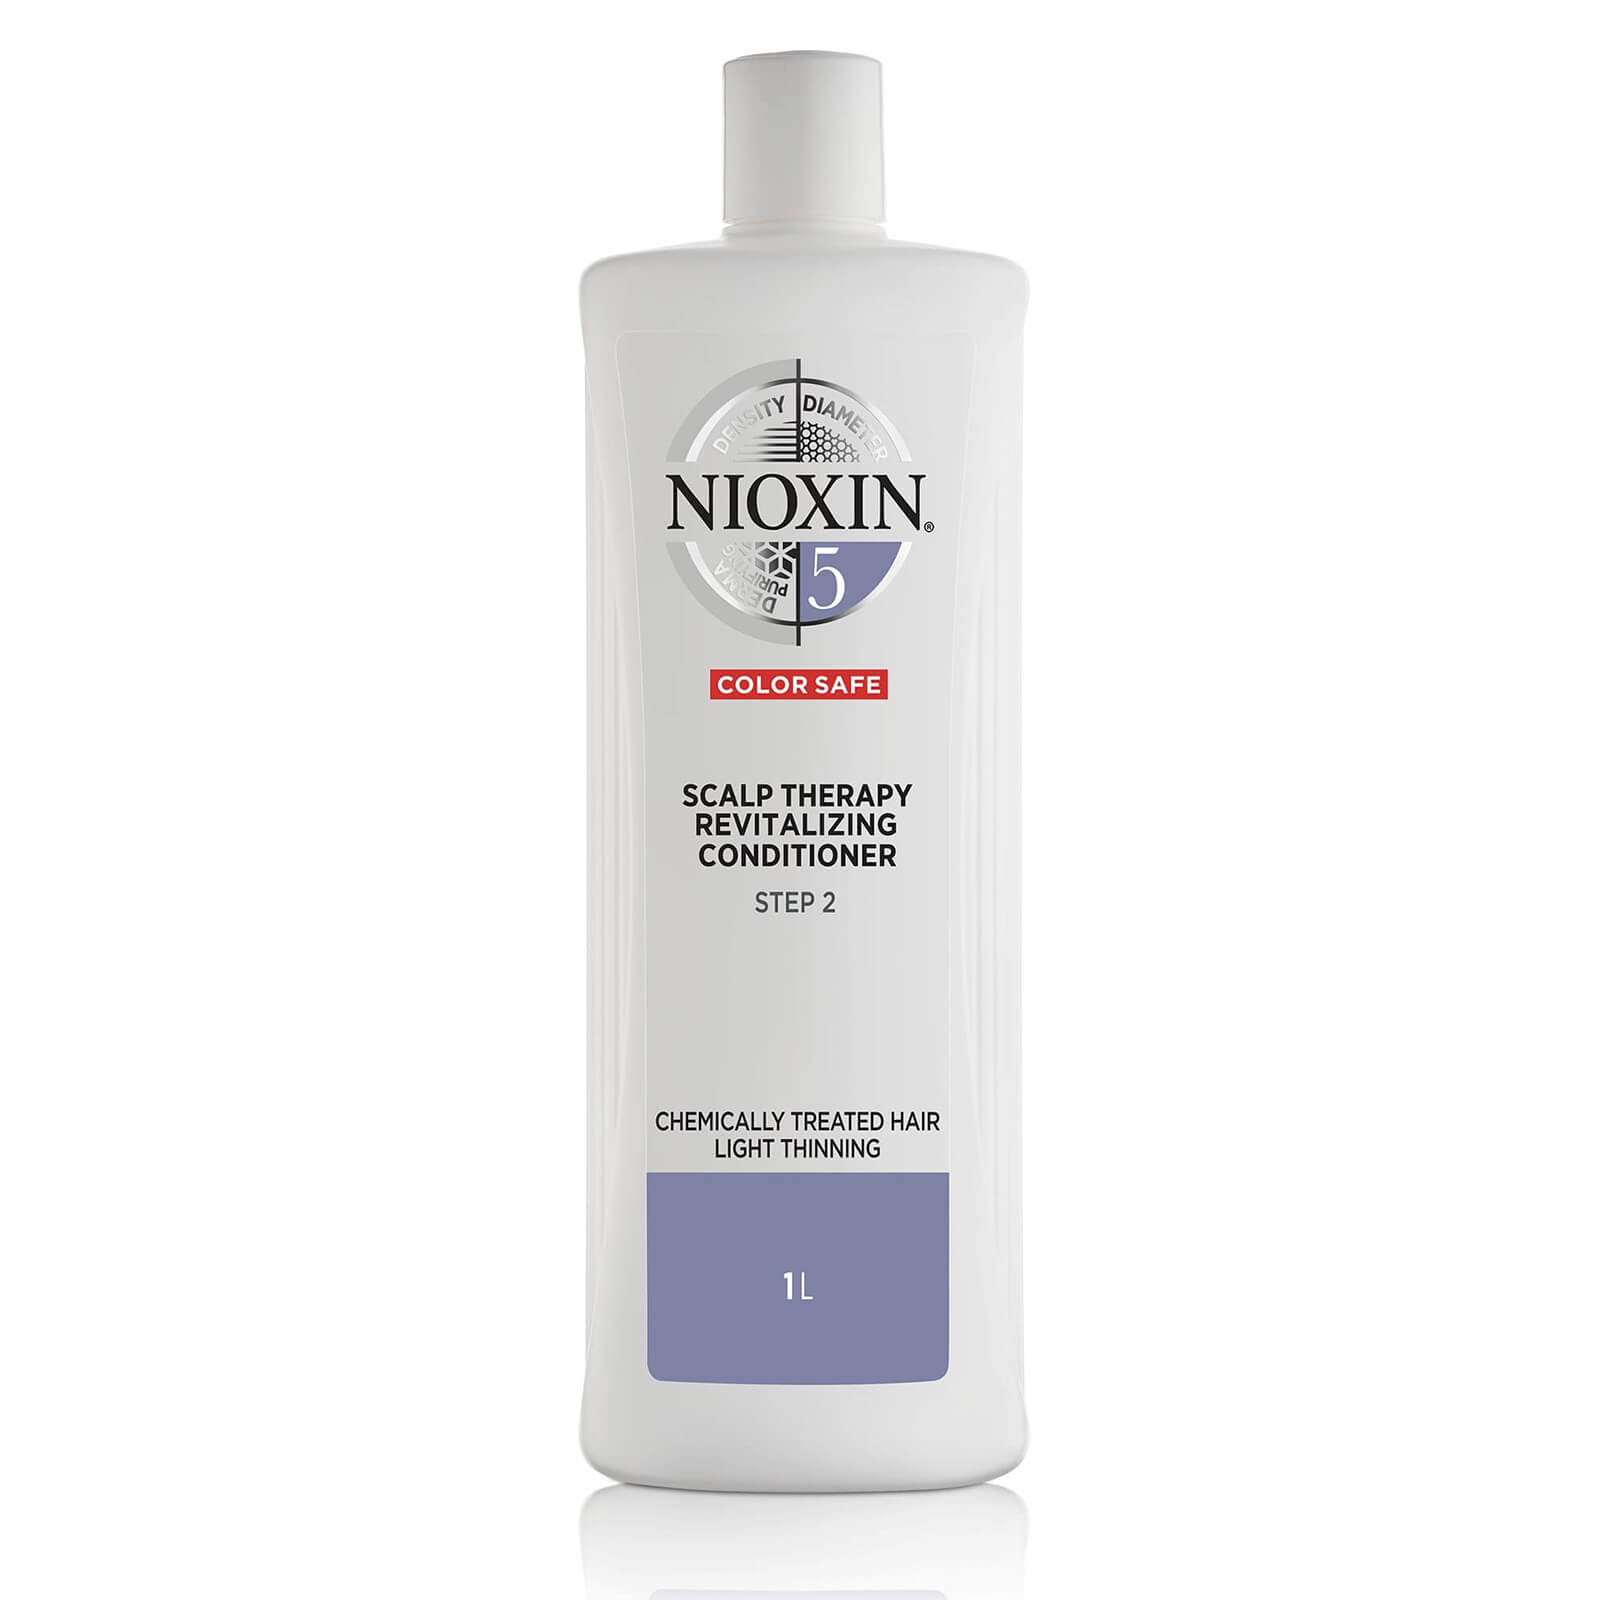 Nioxin Scalp Therapy Conditioner System 5 33.8 fl. oz product